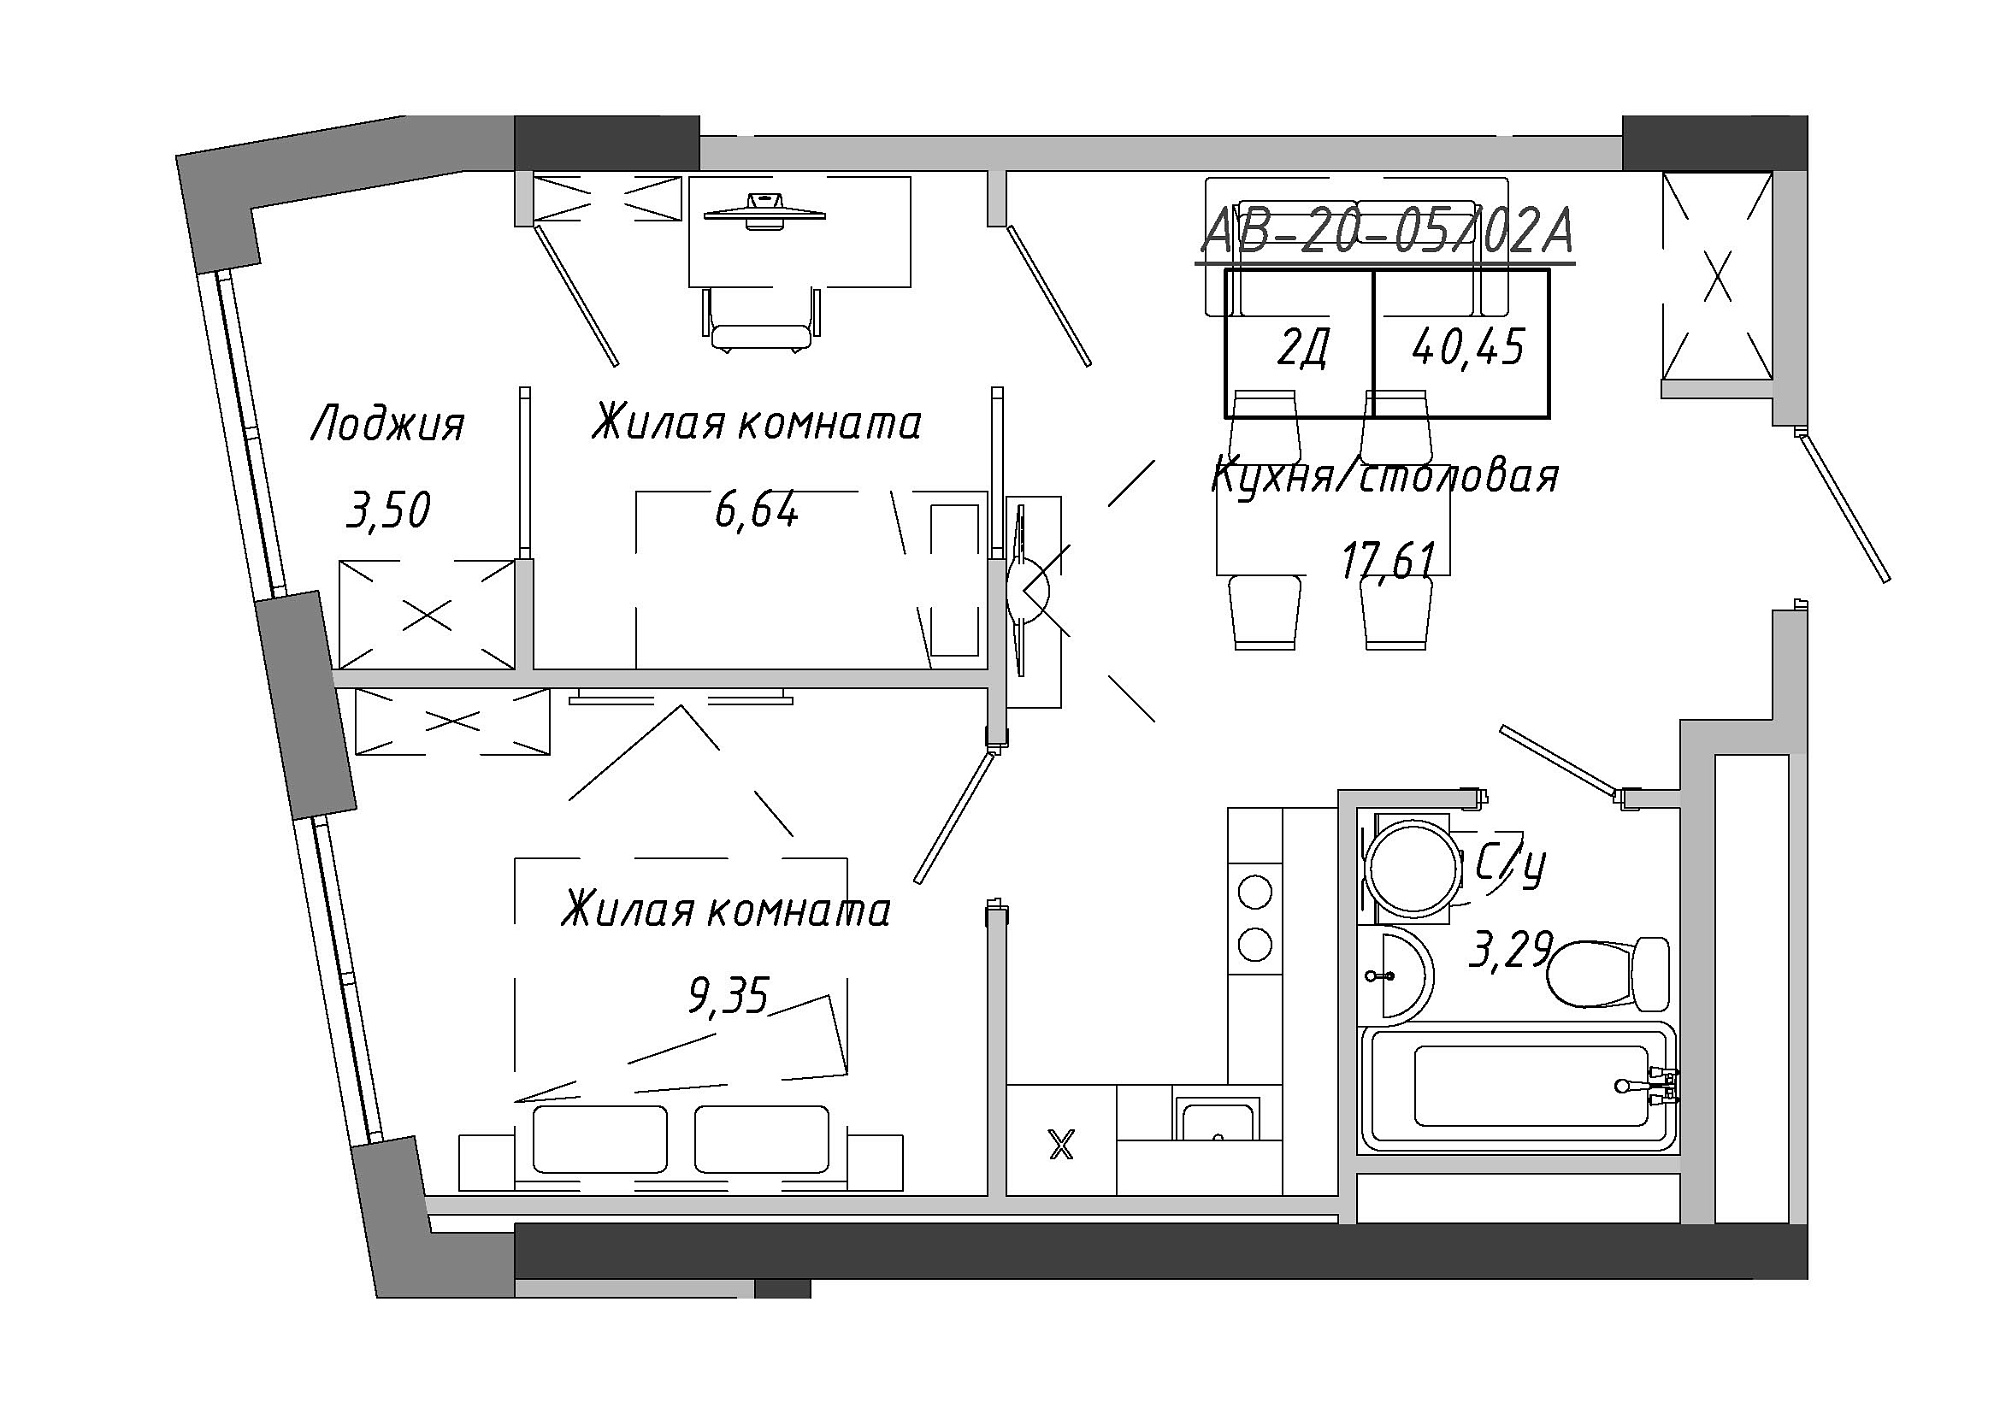 Planning 2-rm flats area 41.9m2, AB-20-05/0002а.